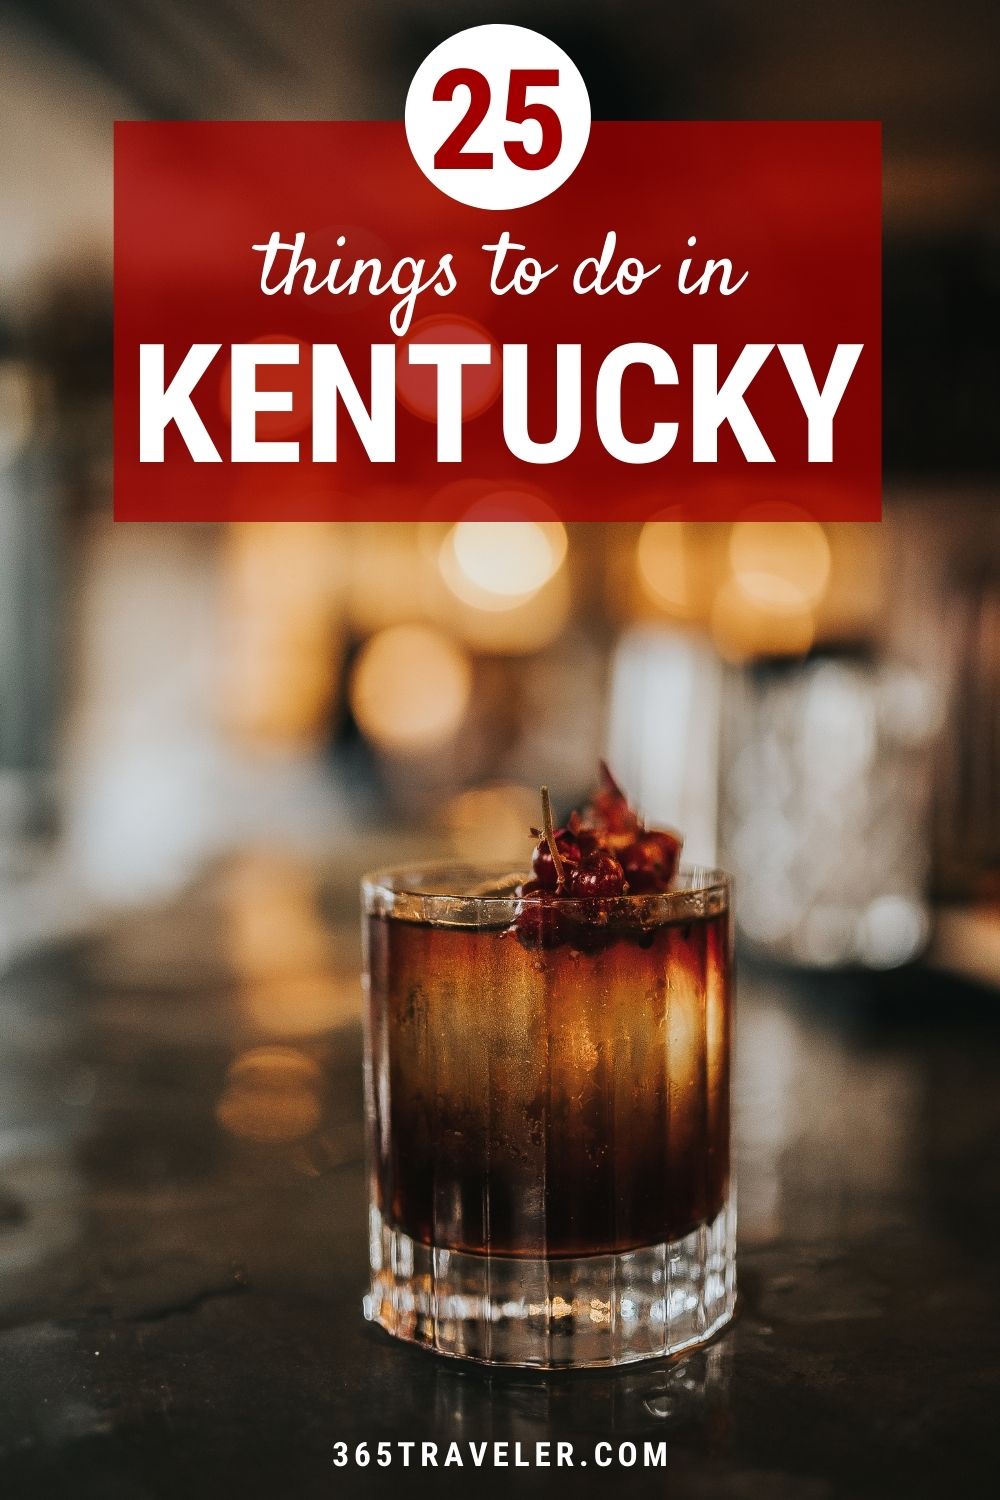 25 BEST THINGS TO DO IN KENTUCKY YOU CAN'T MISS